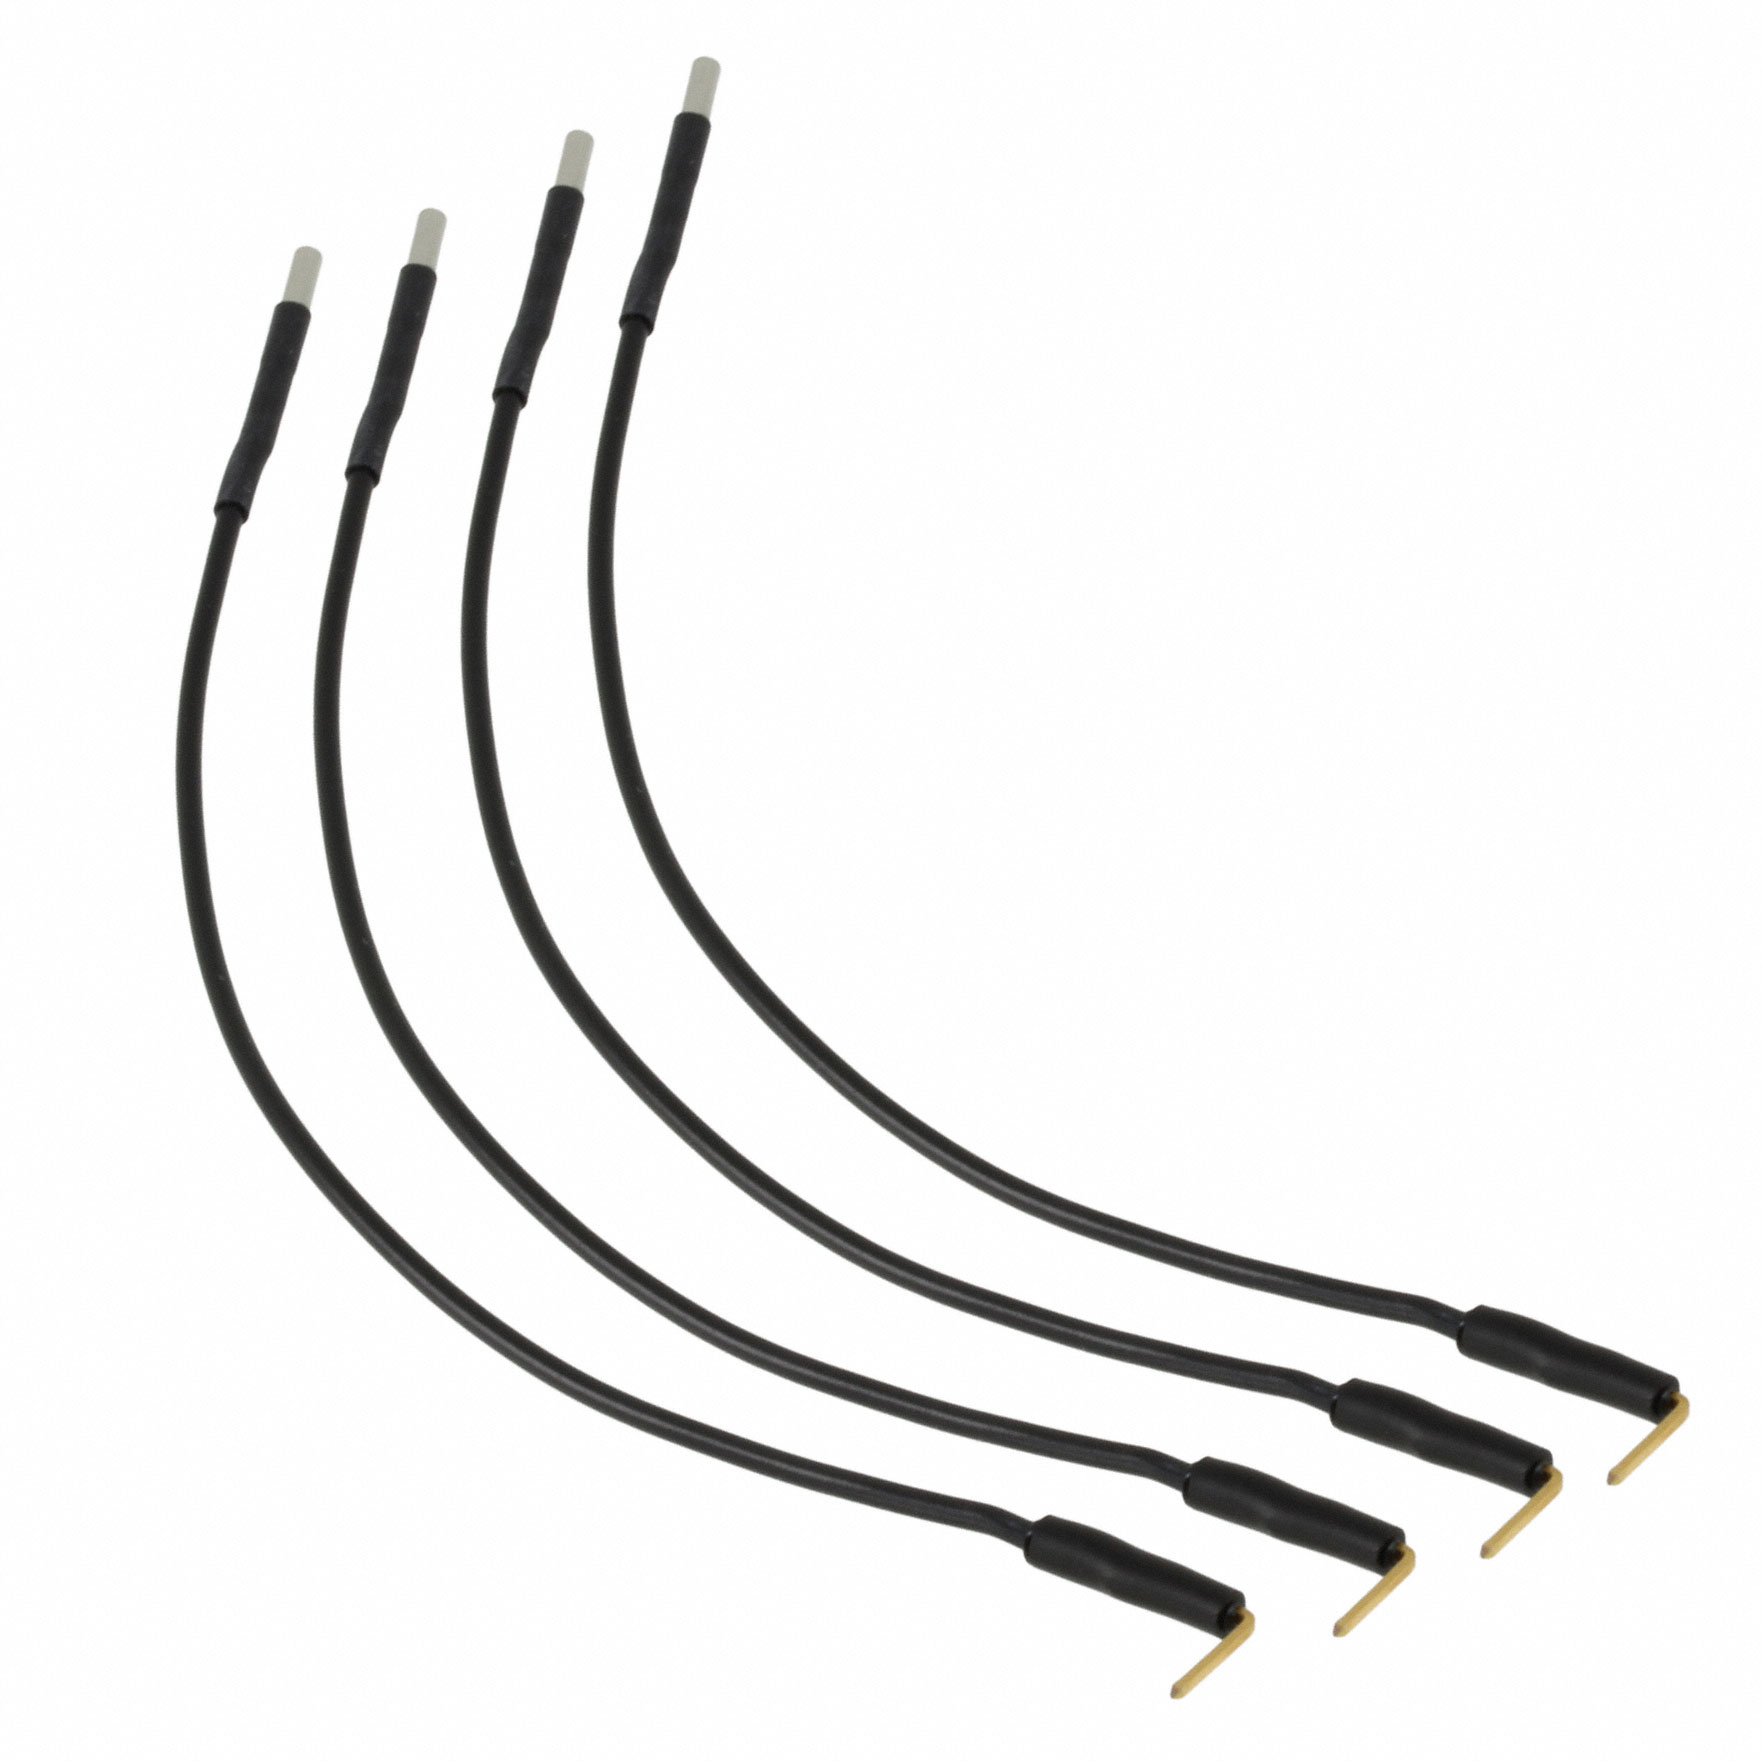 PACC-LD004 Teledyne LeCroy                                                                    RIGHT ANGLE LEAD LONG 4/PC